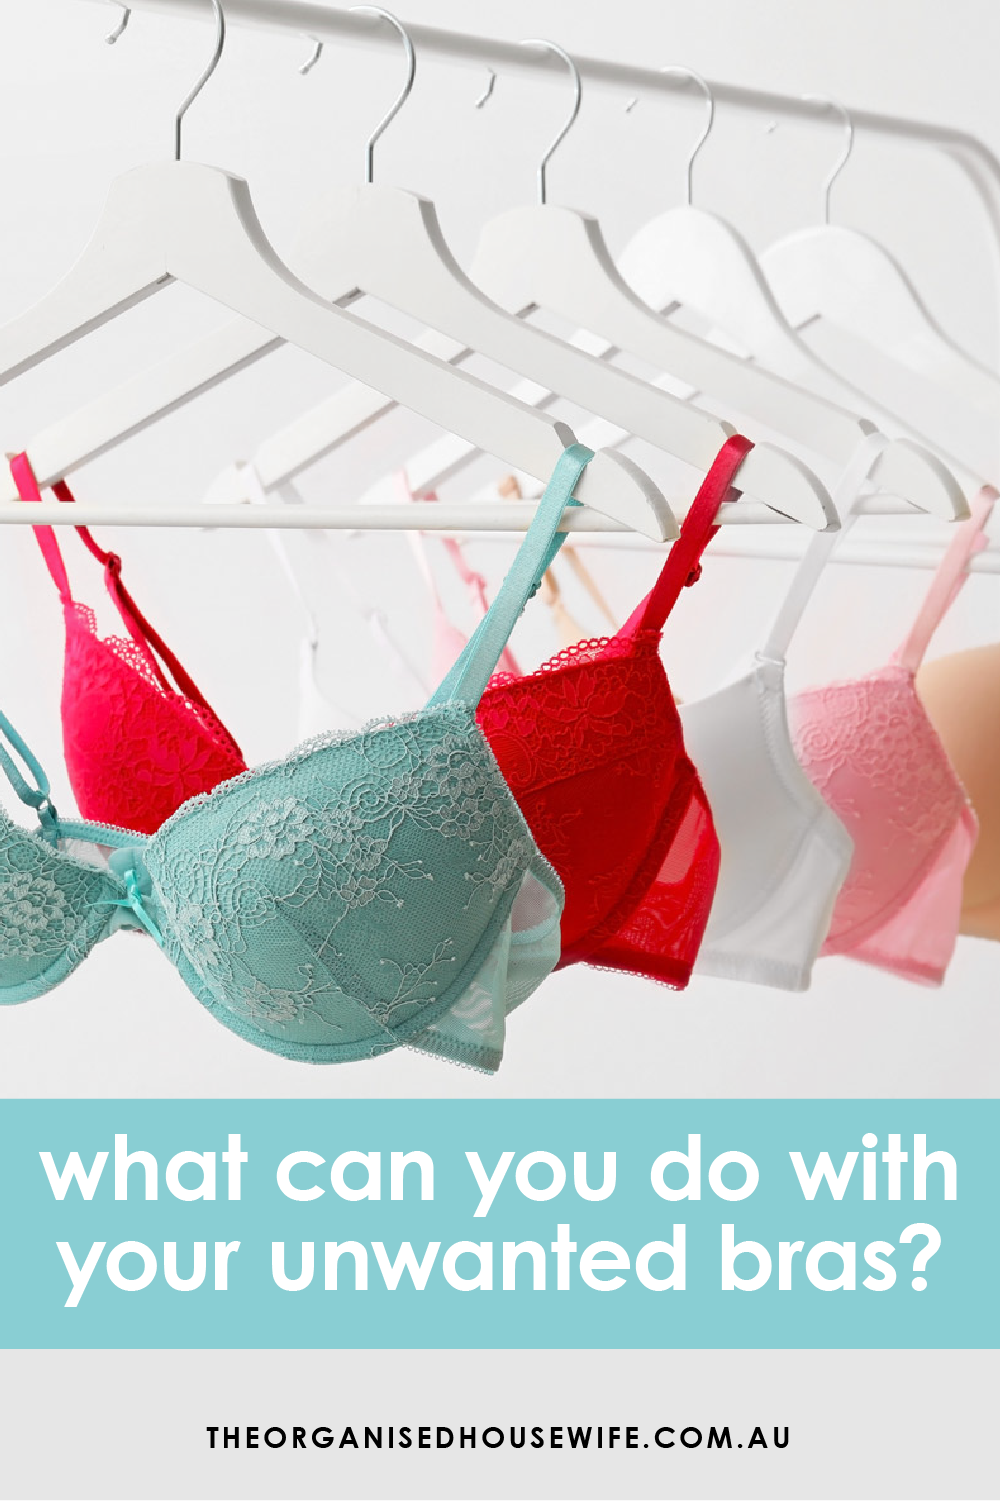 What can you do with unwanted bras? - The Organised Housewife